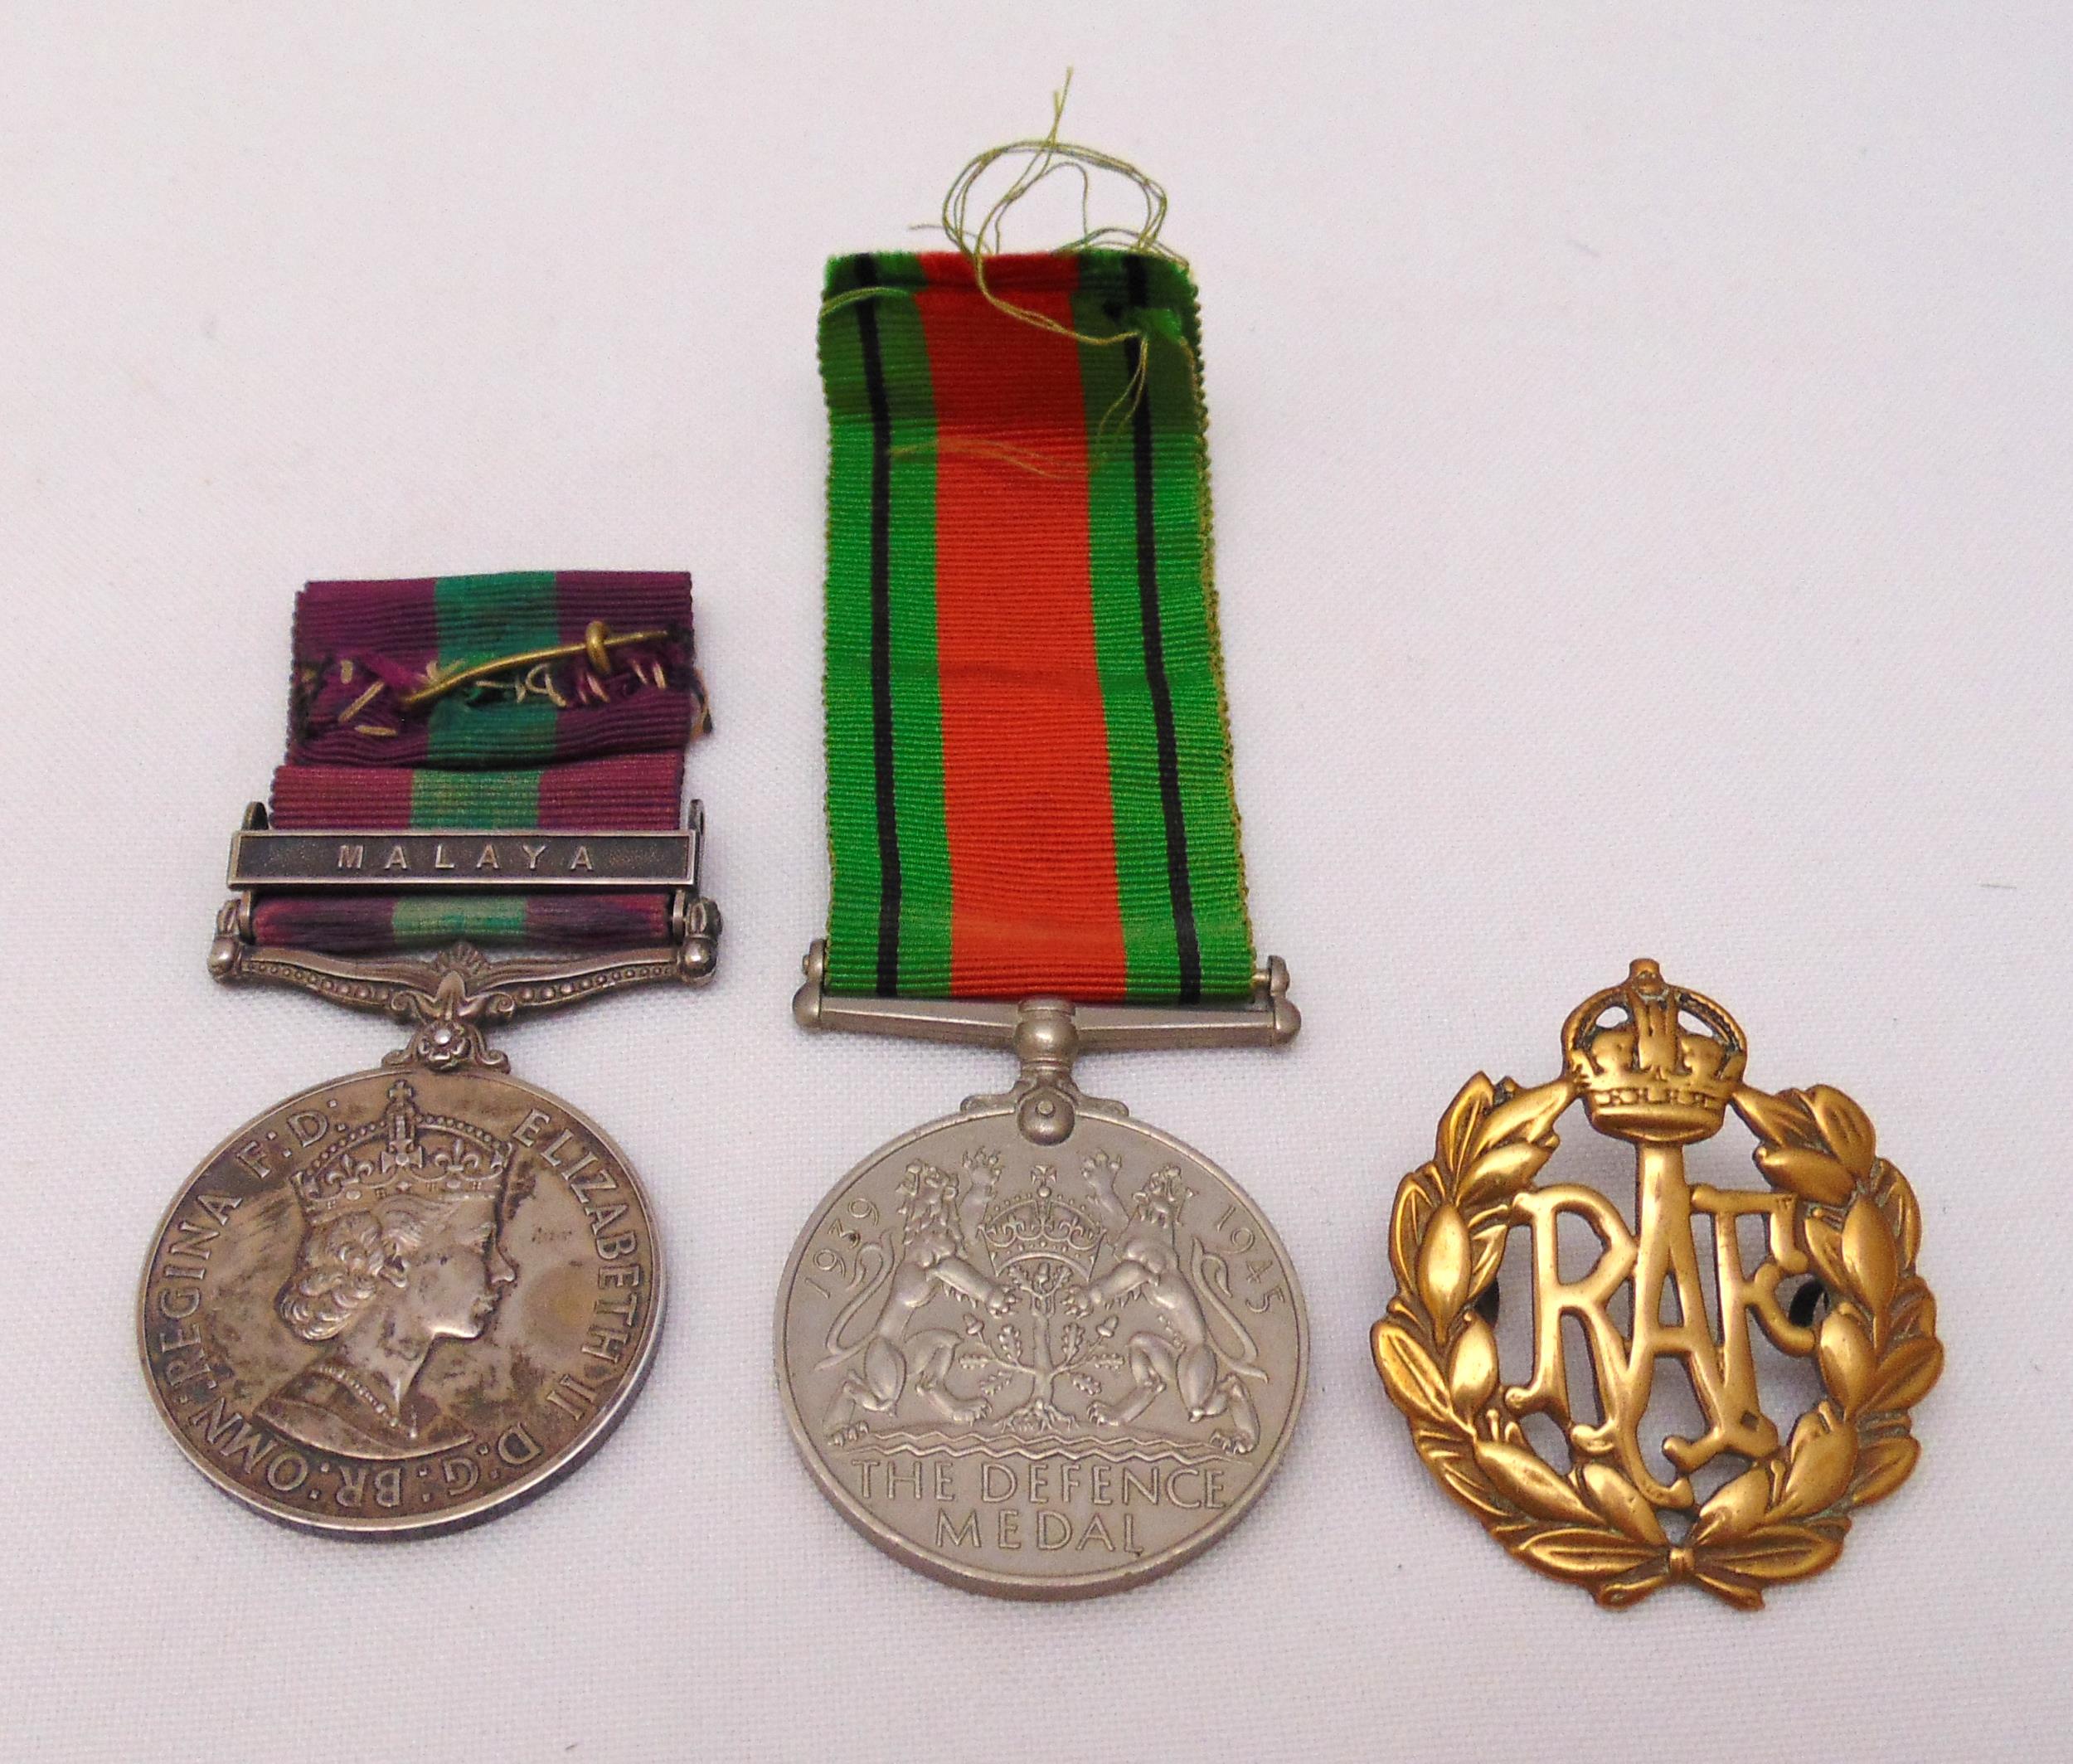 Queen Elizabeth II General Service medal and ribbon with Malaya bar attributed to 4091096 L.A.C.A.R.